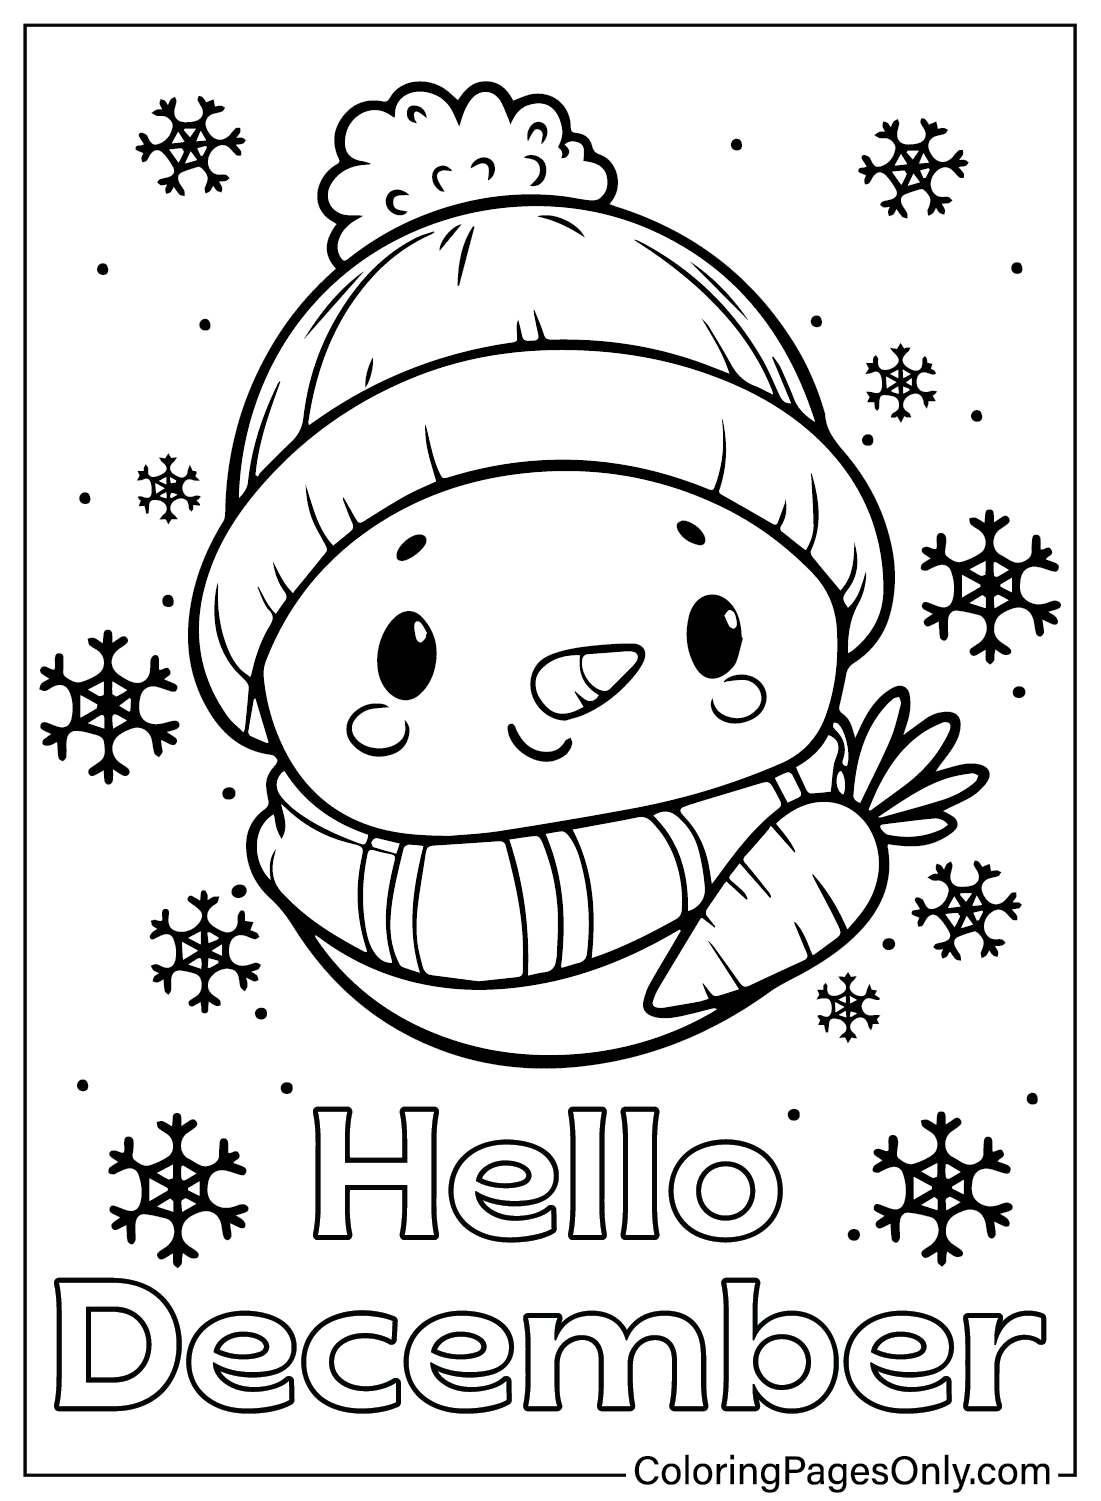 December Coloring Page Free